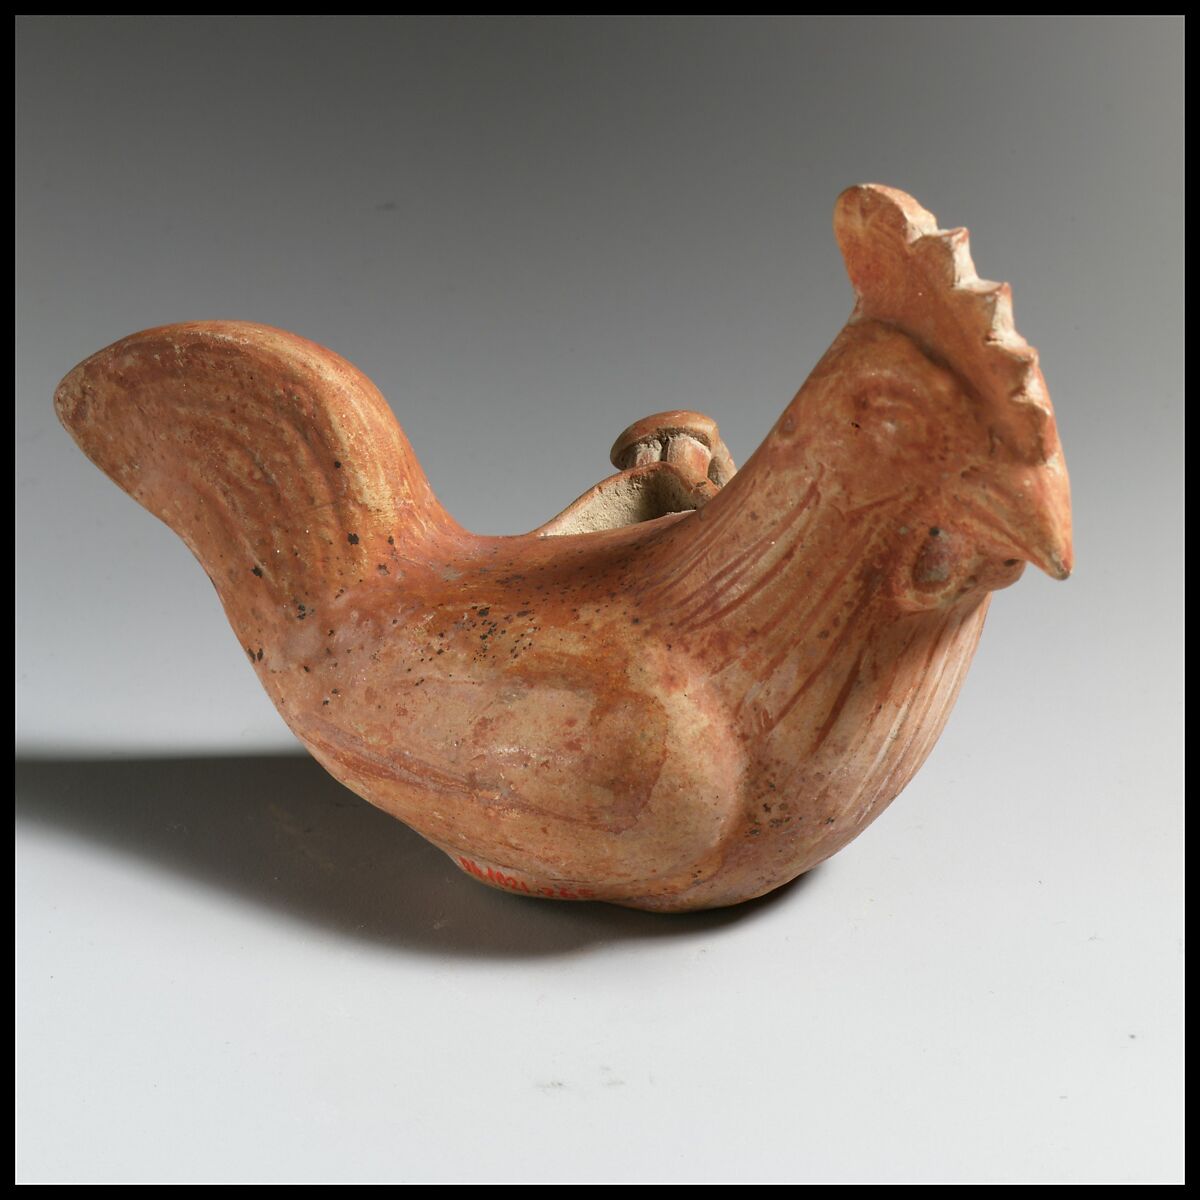 Terracotta askos (flask with a spout) in the form of a cock, Terracotta, Italic 